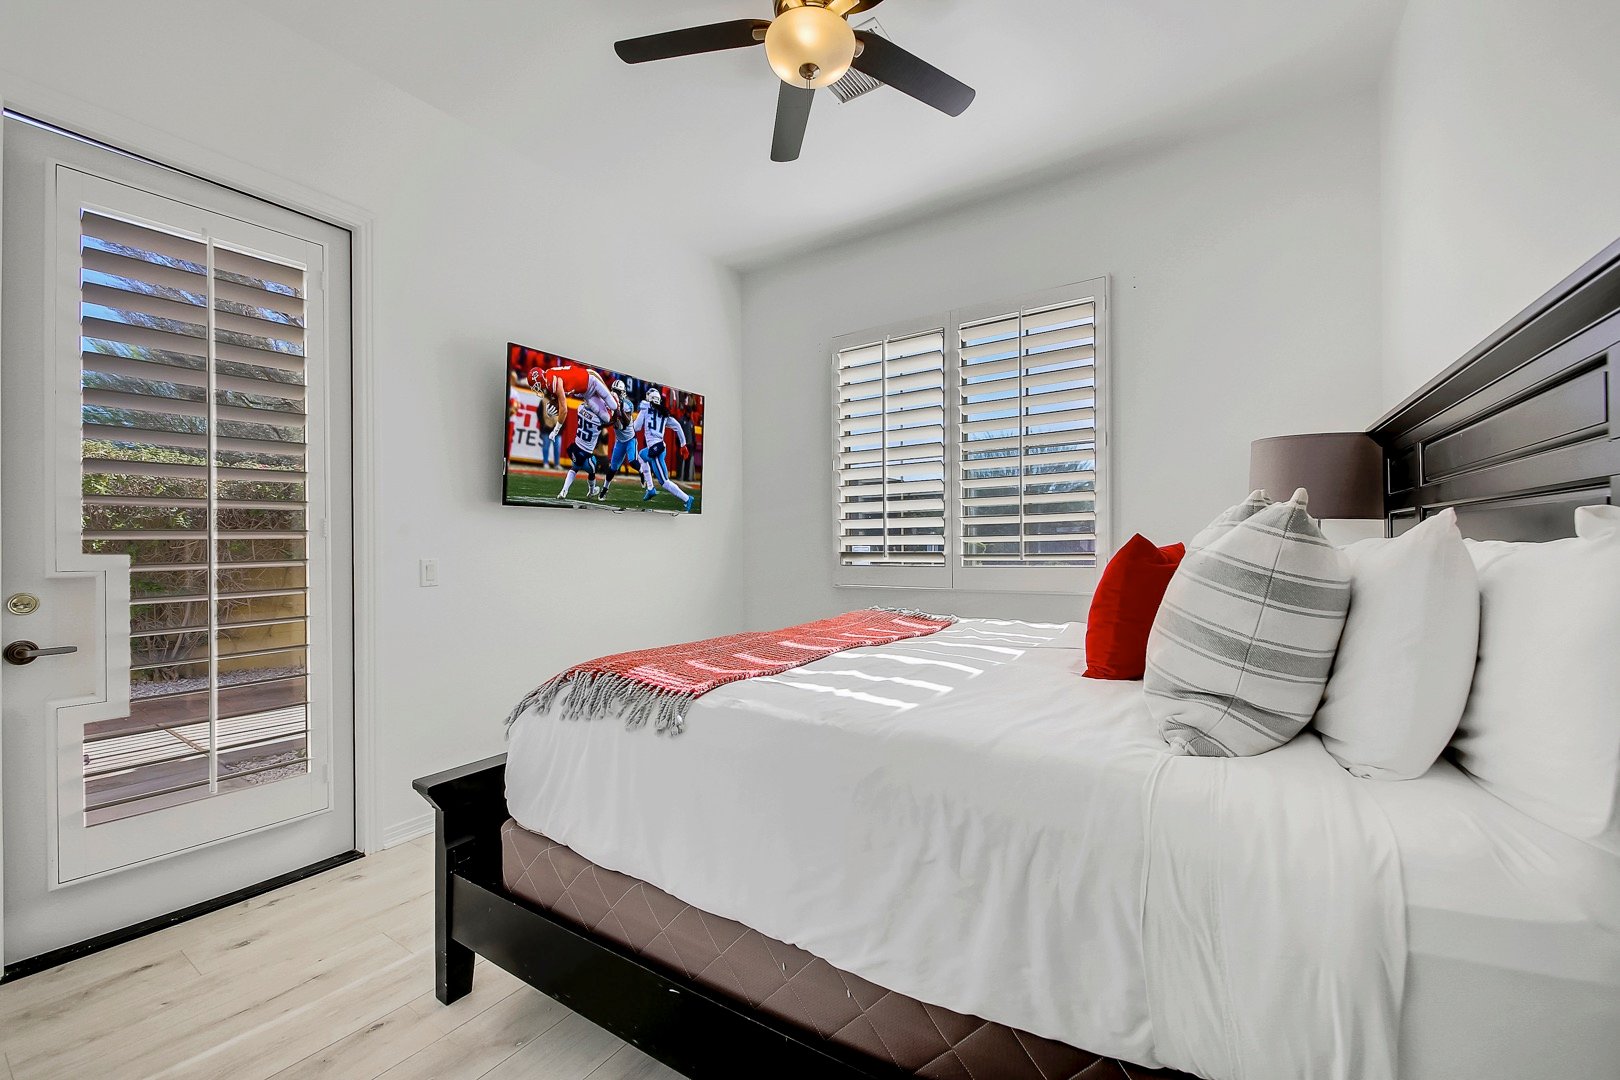 Suite 3 is Located next to the garage and features a Cal King-sized Bed, HD television, switch-controlled ceiling fan, and reach-in closet with access to the front courtyard.